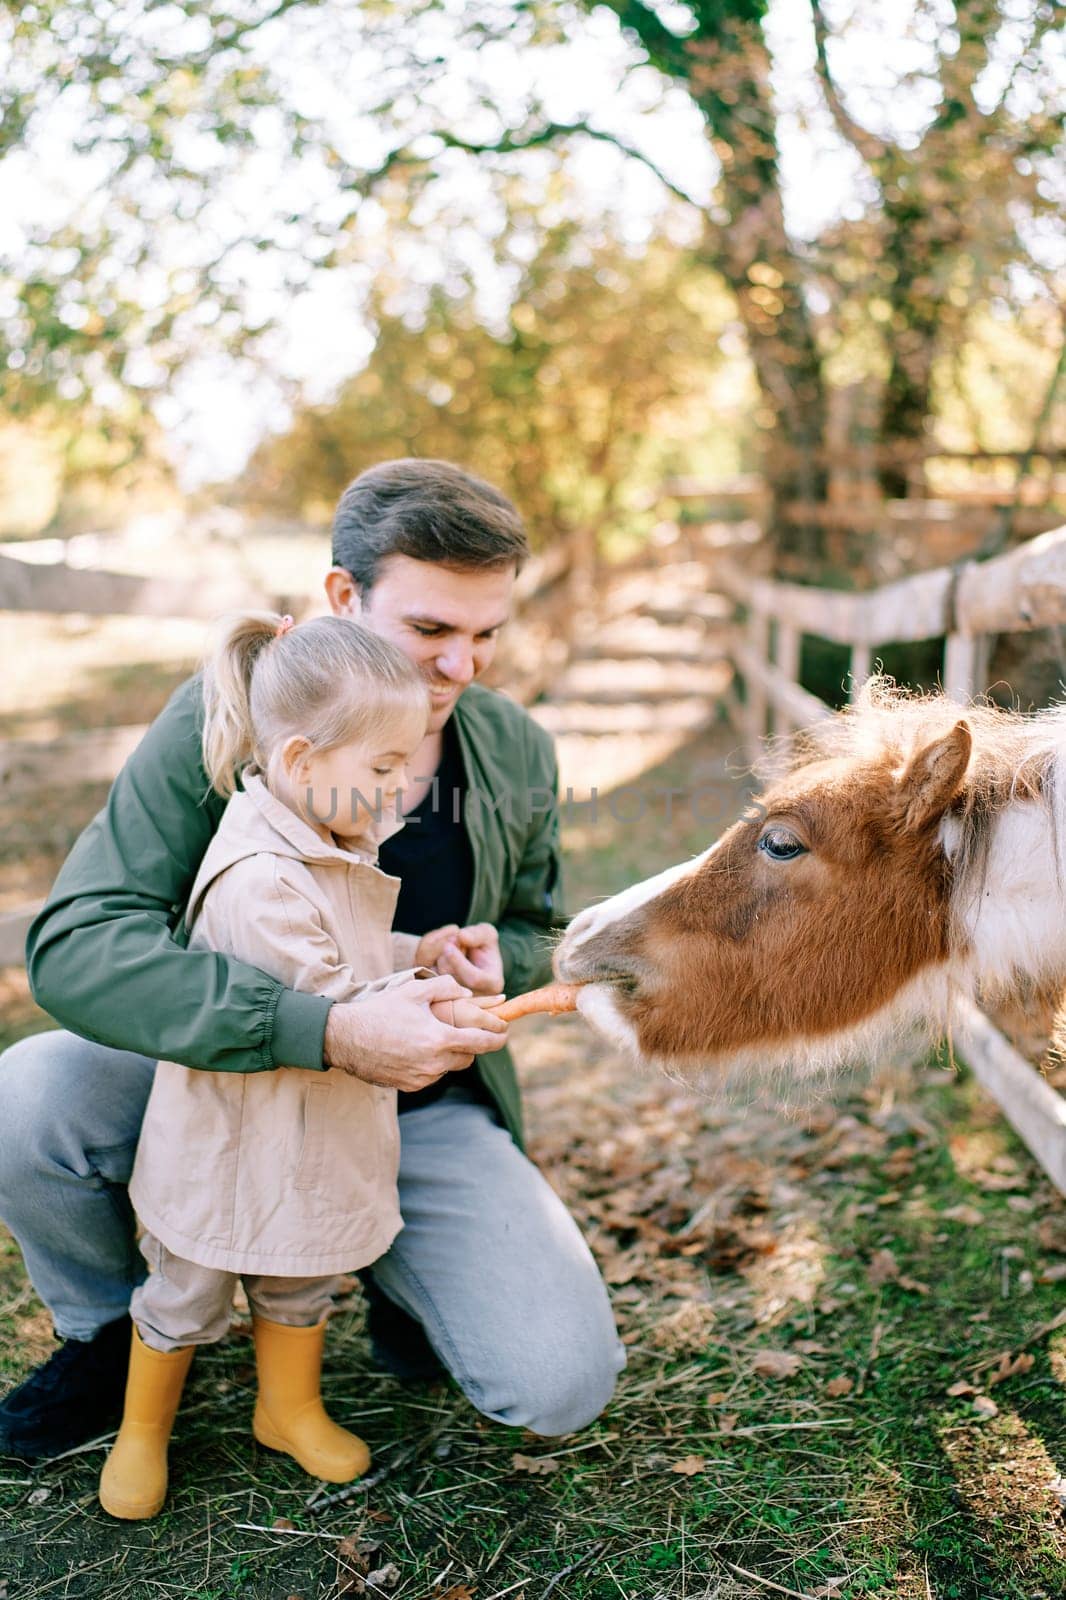 Smiling dad holding hand of little girl feeding pony through fence in park by Nadtochiy